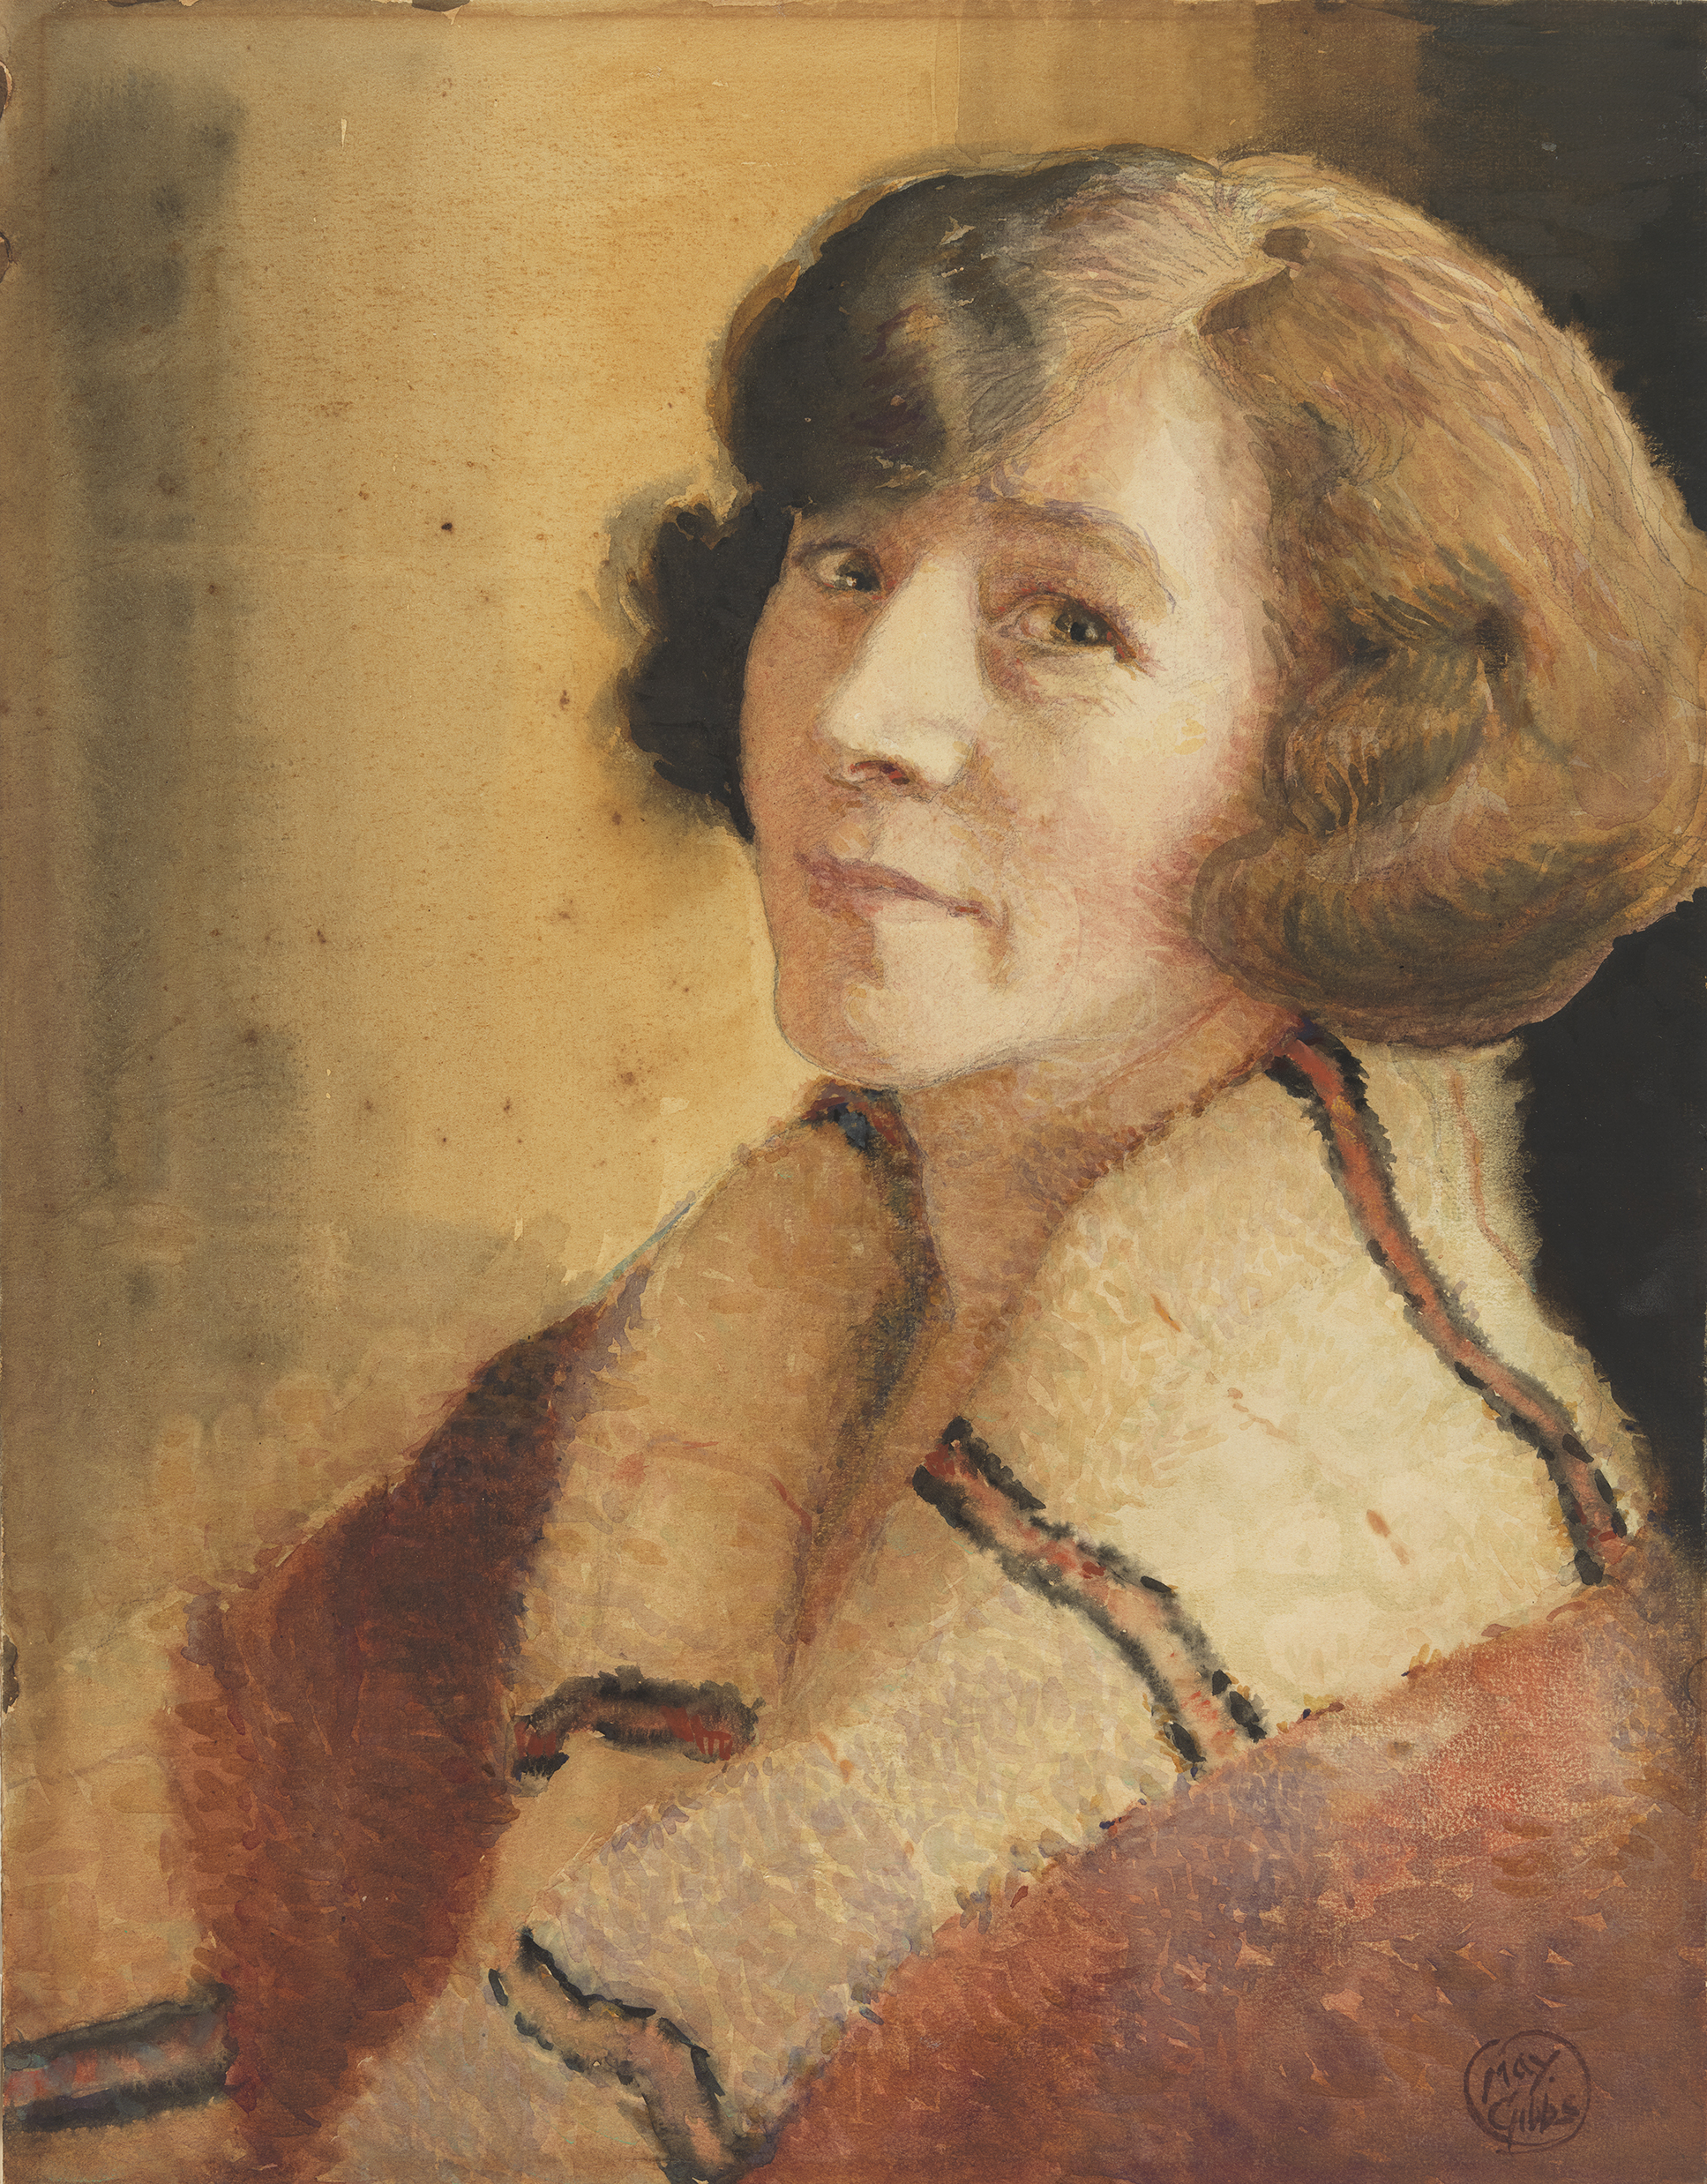 A painting of warm brown, yellow and orange tones depicts a middle-aged caucasian woman with short brow hair looking directly at the viewer.